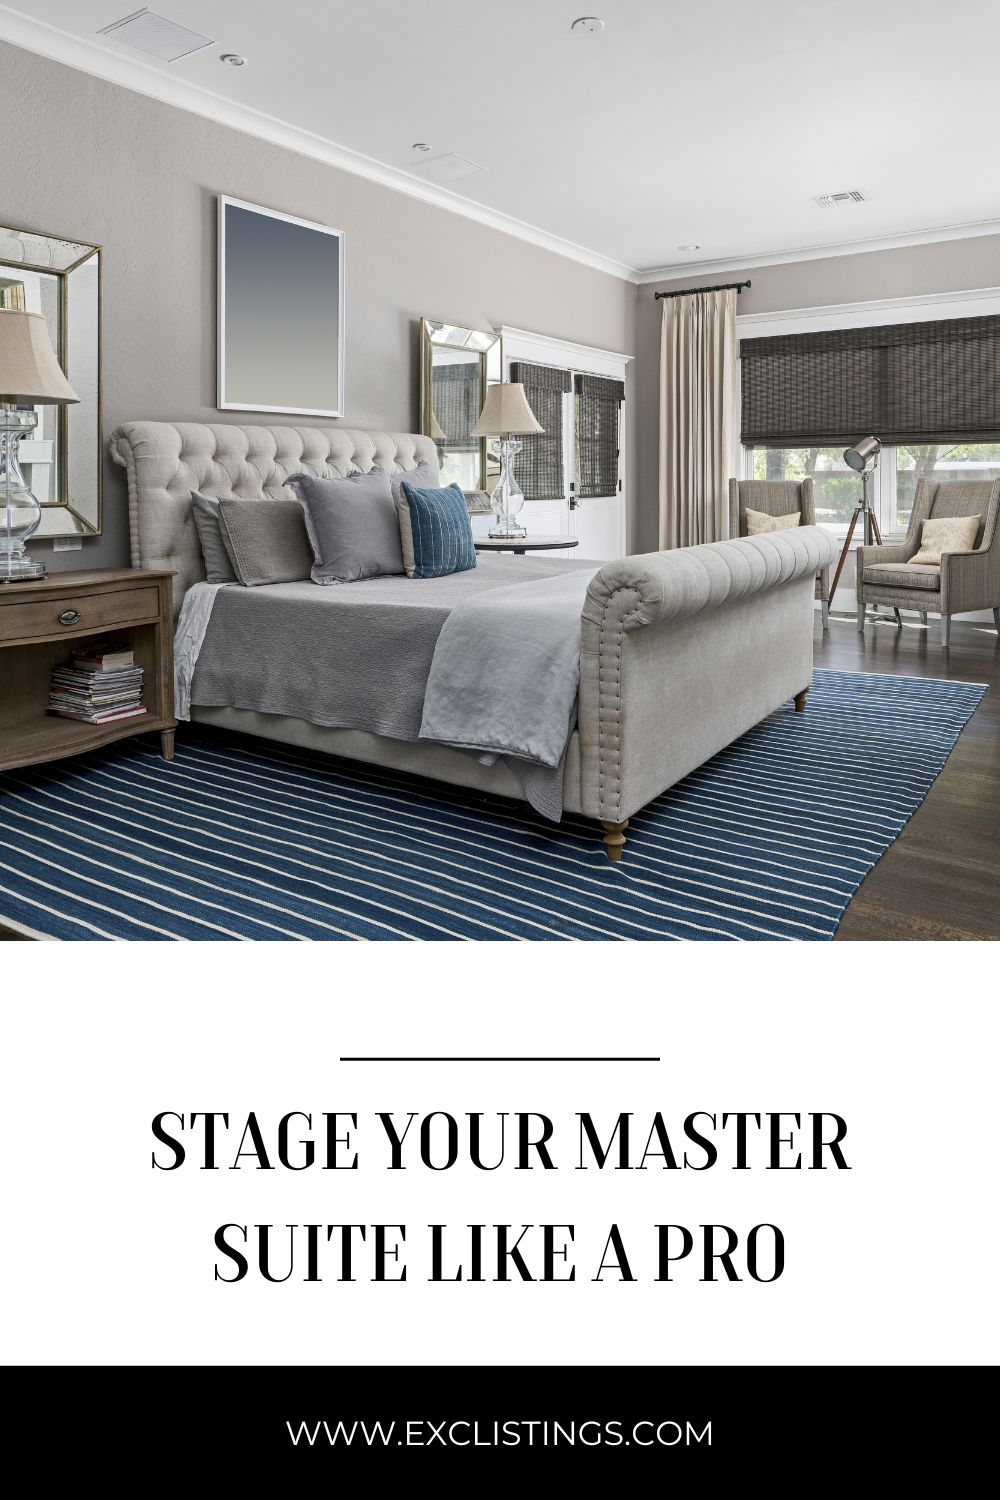 Stage your master suite